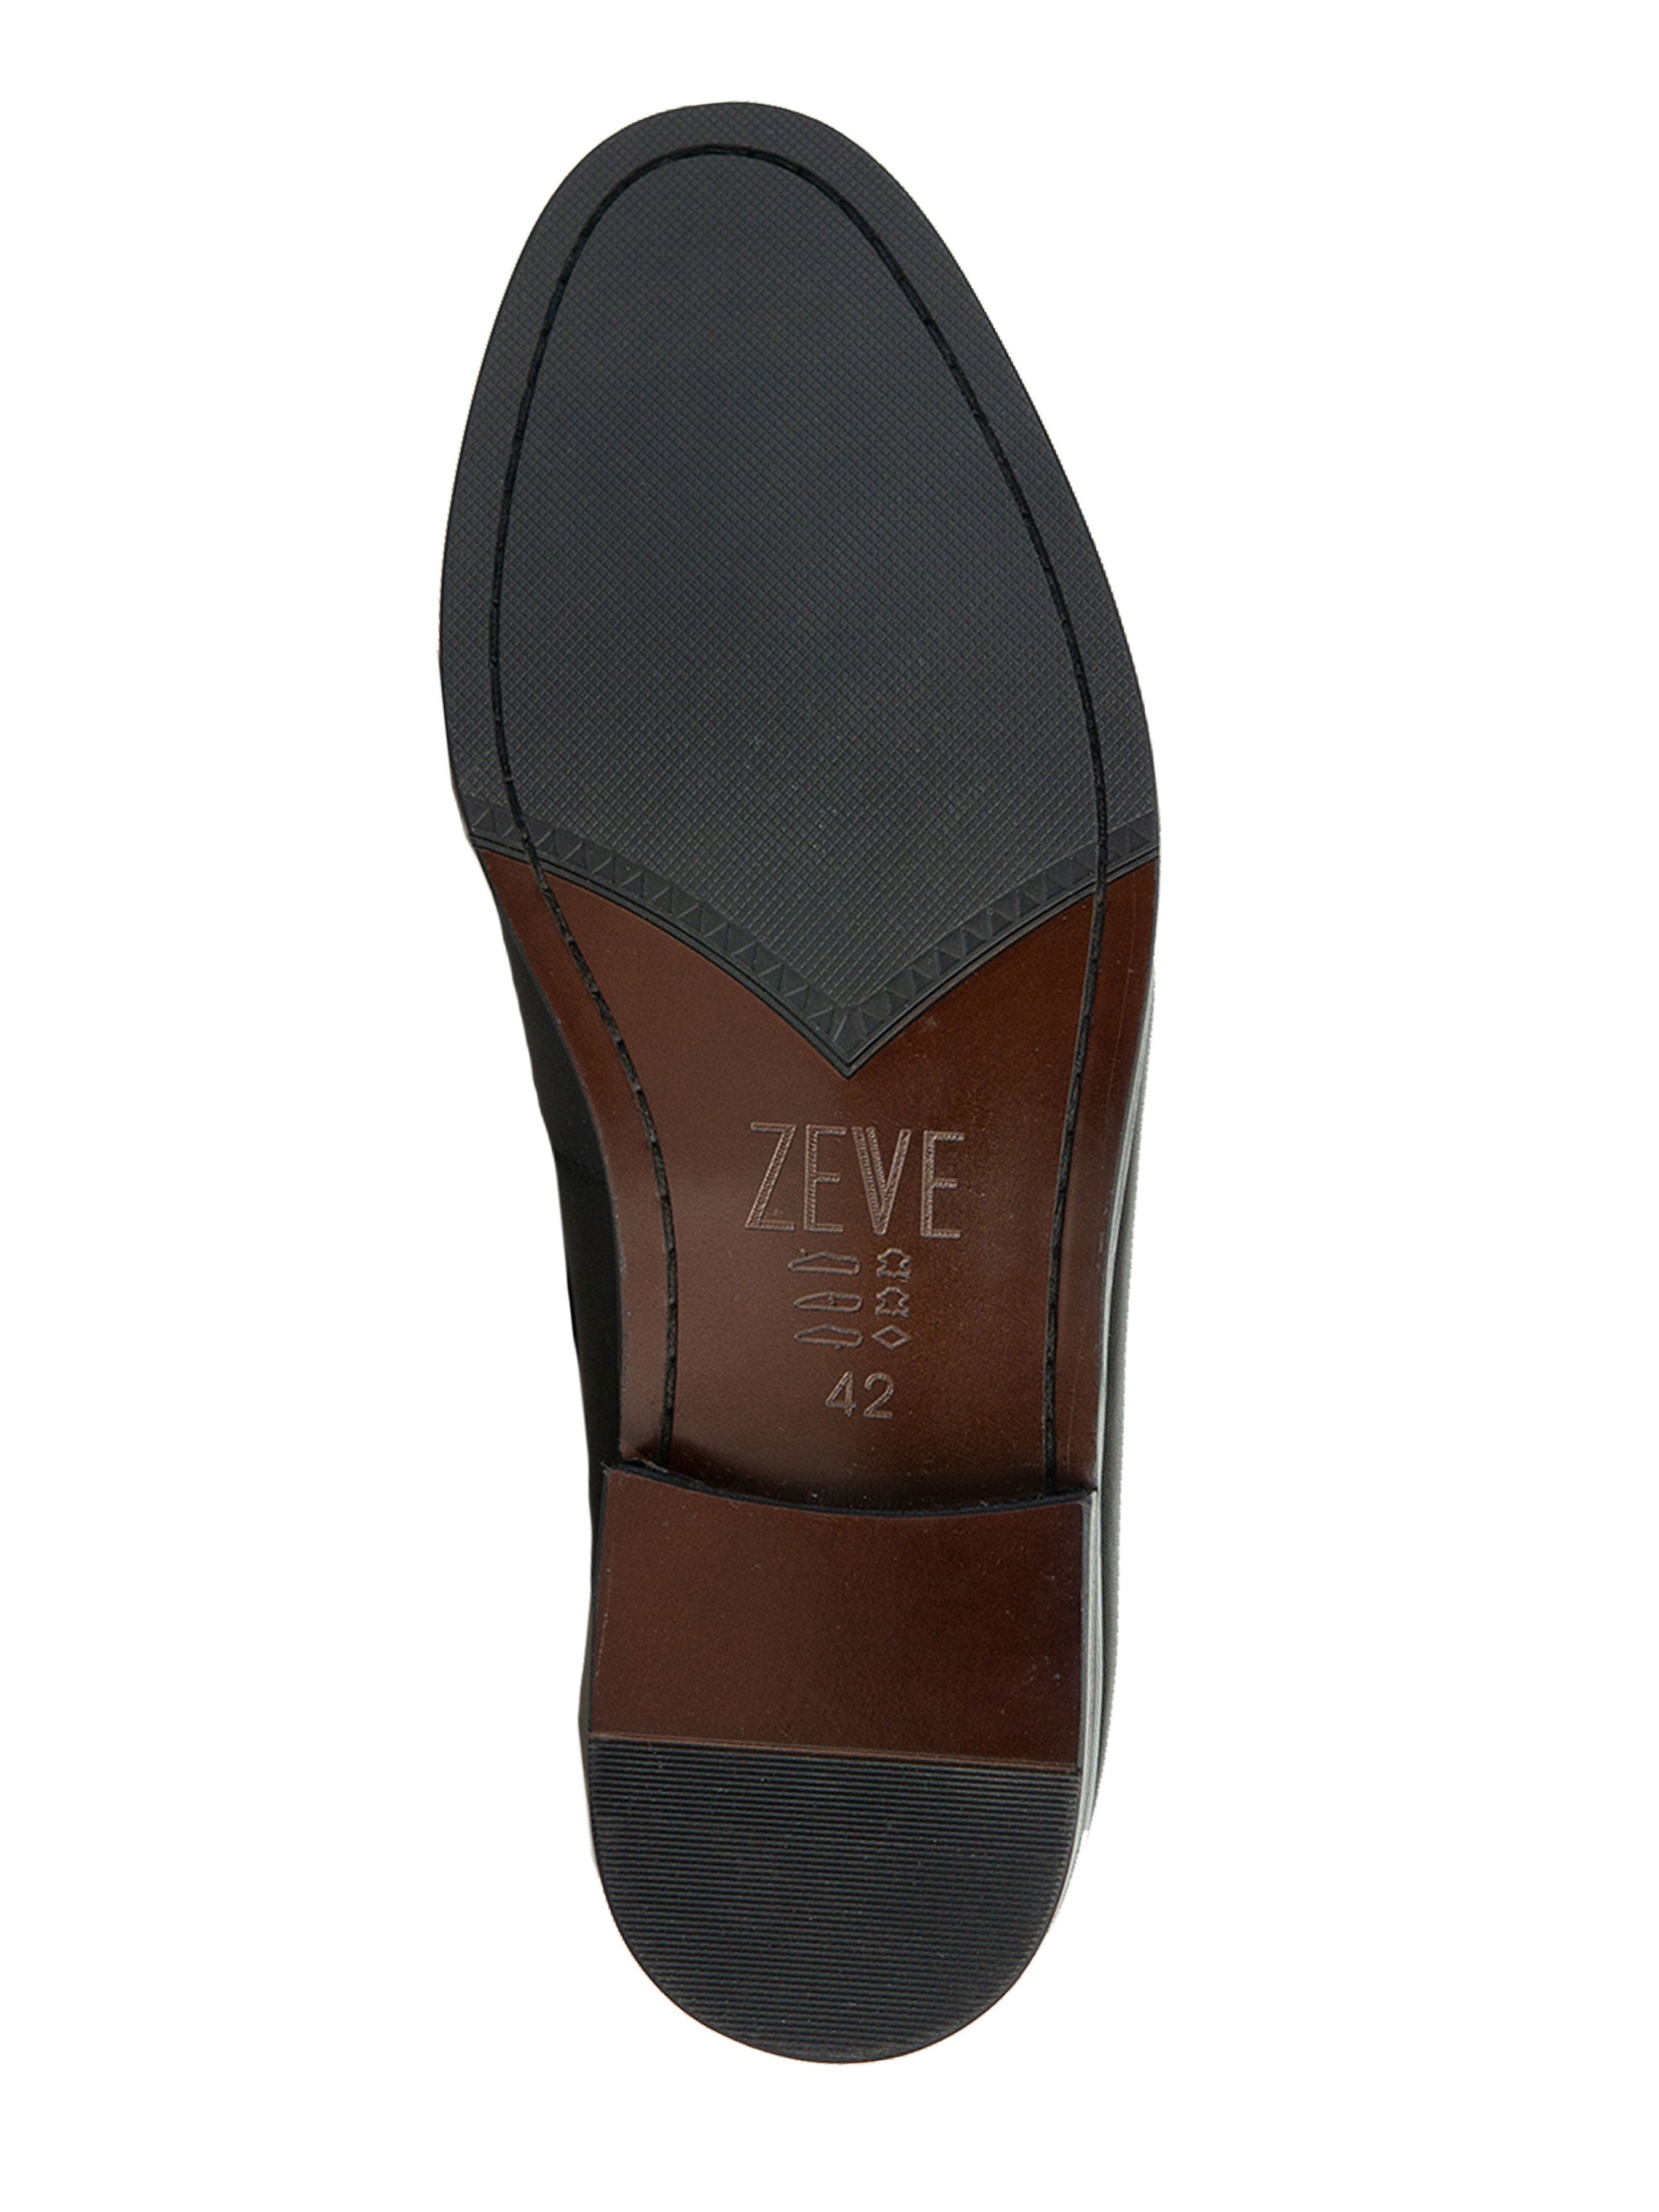 Tassel Moccasin Loafer - Dark Brown (Hand Painted Patina) - Zeve Shoes